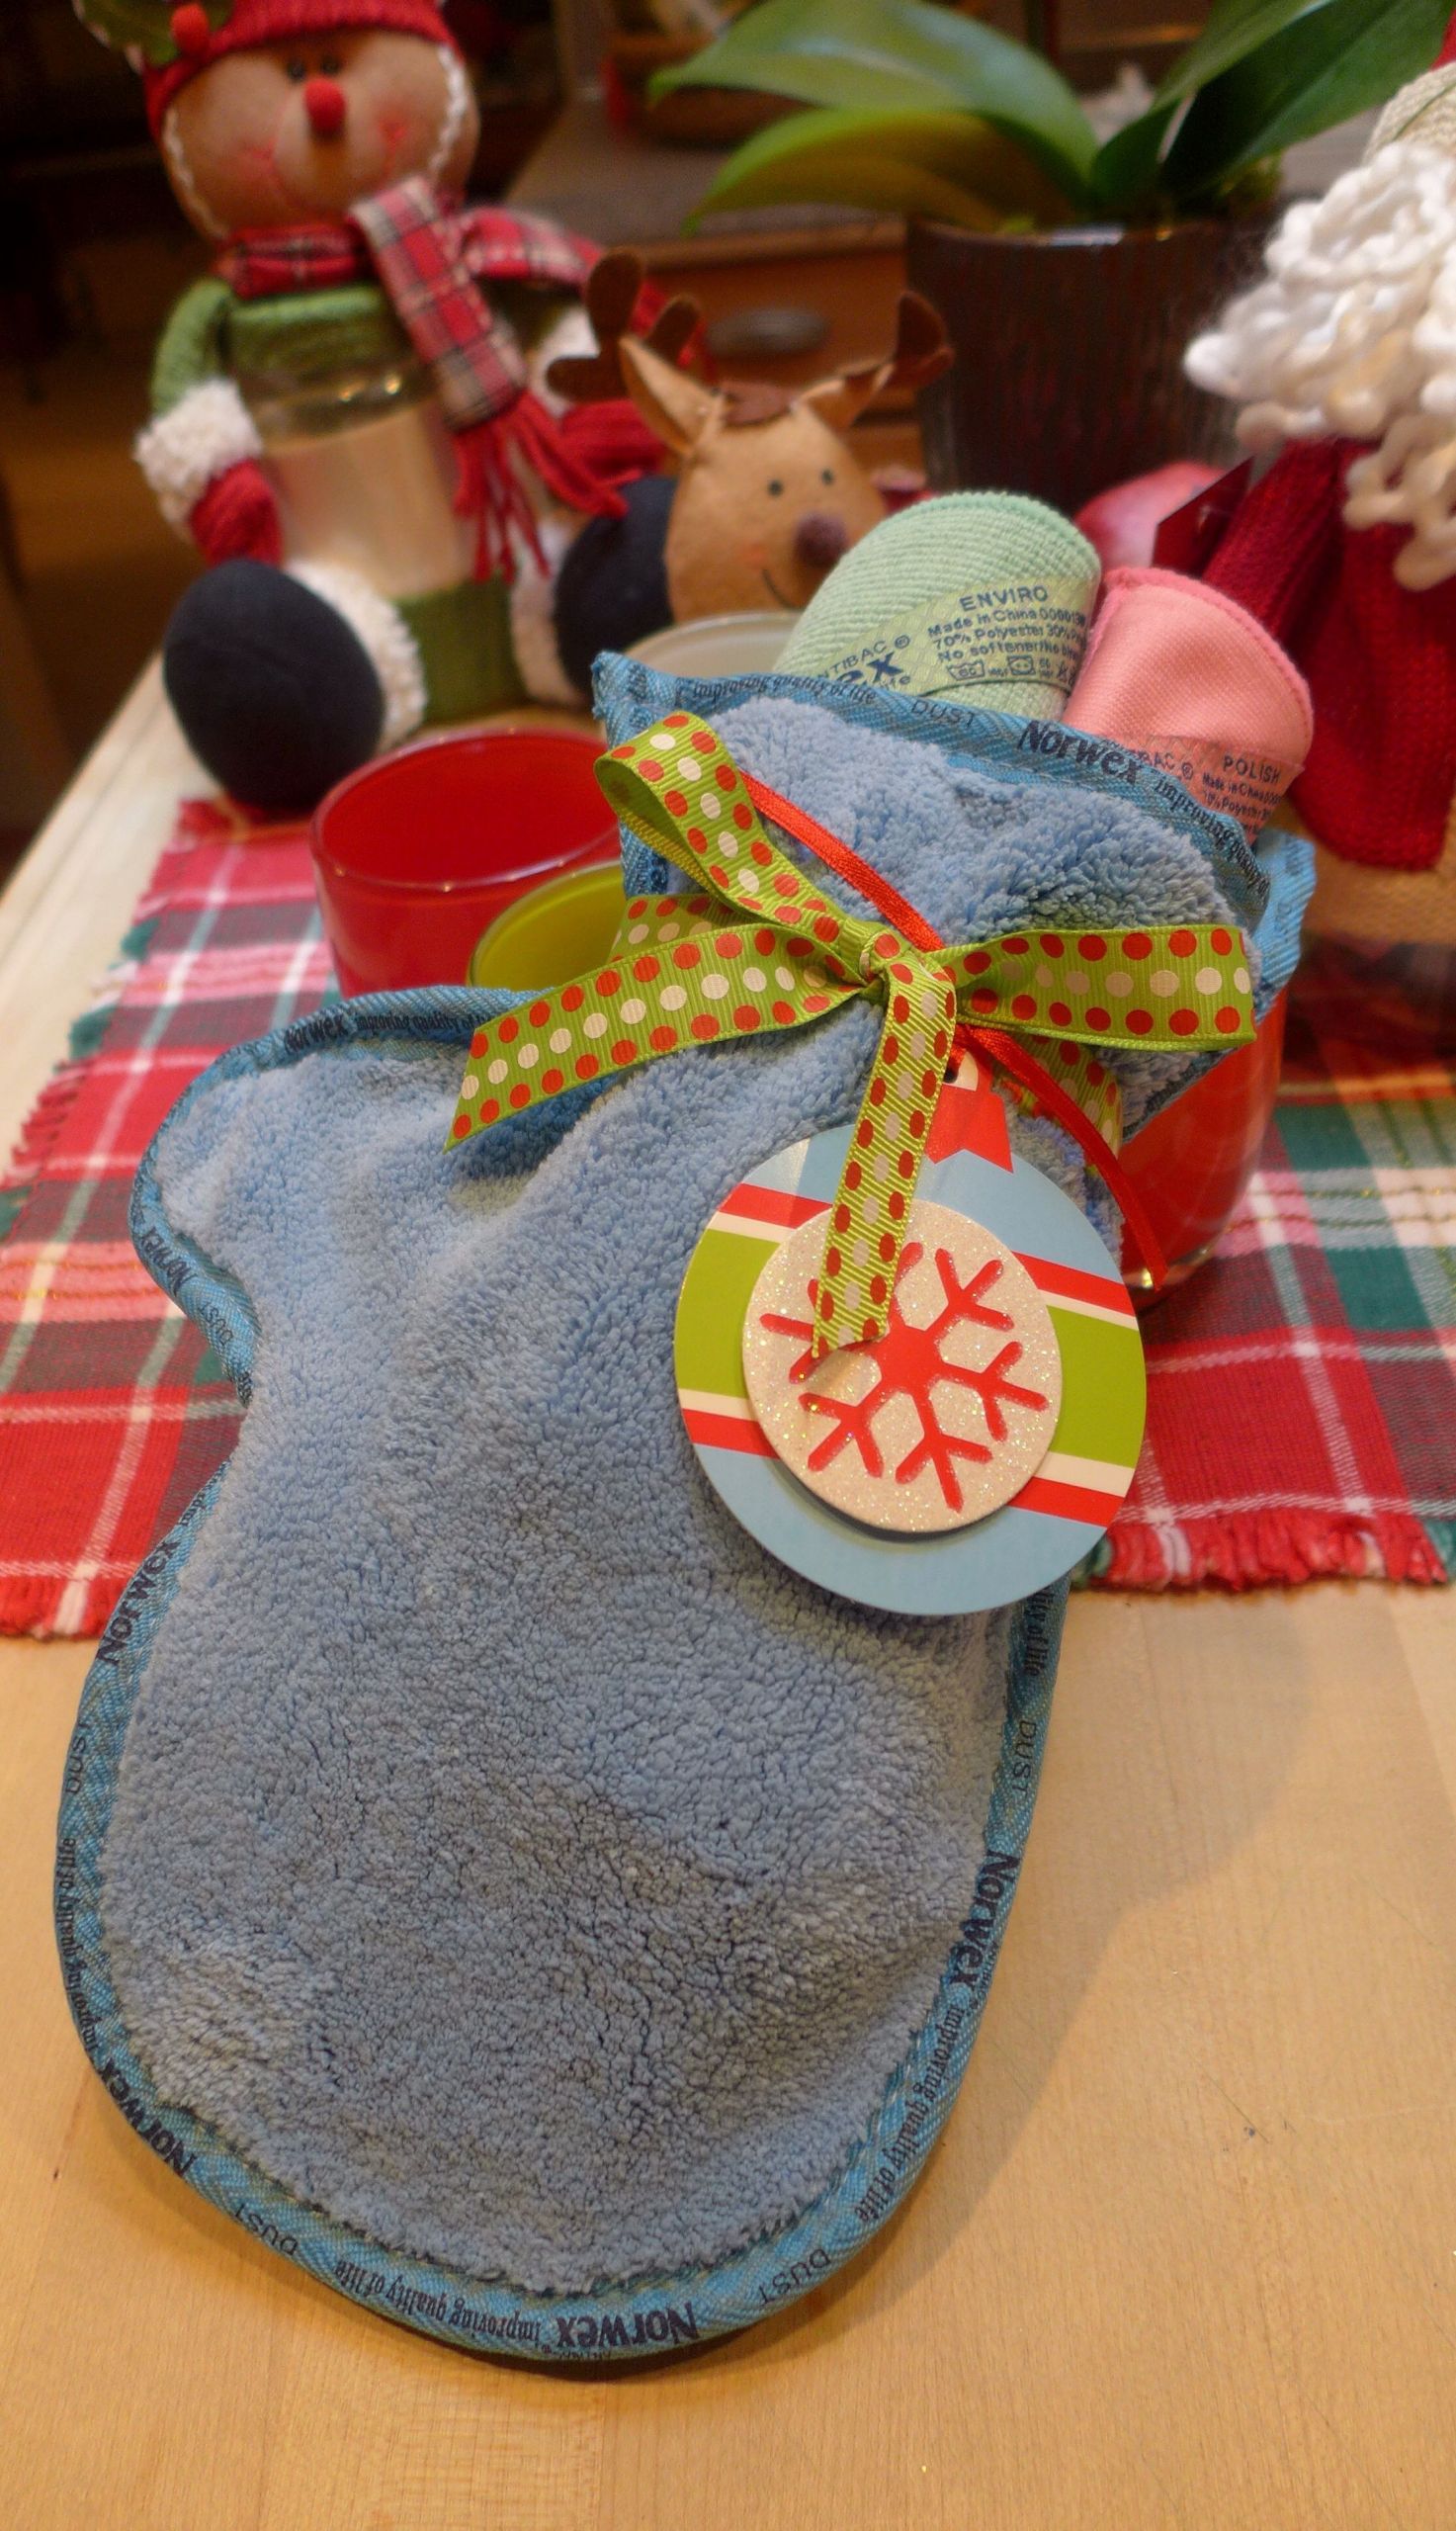 Norwex Holiday Gift Ideas
 Norwex as a cute Christmas present To order the